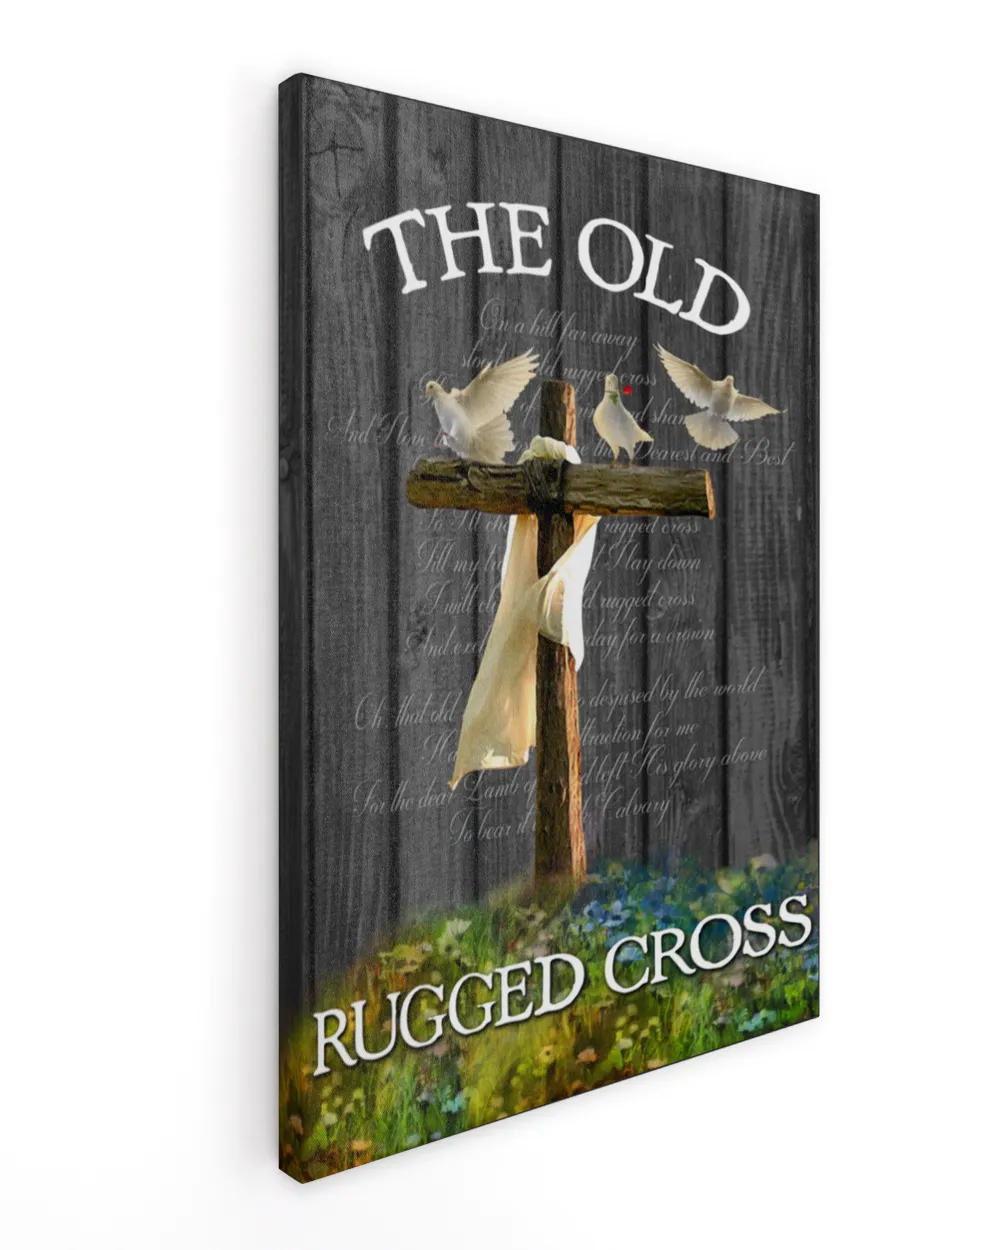 Jesus The Old Rugged Cross